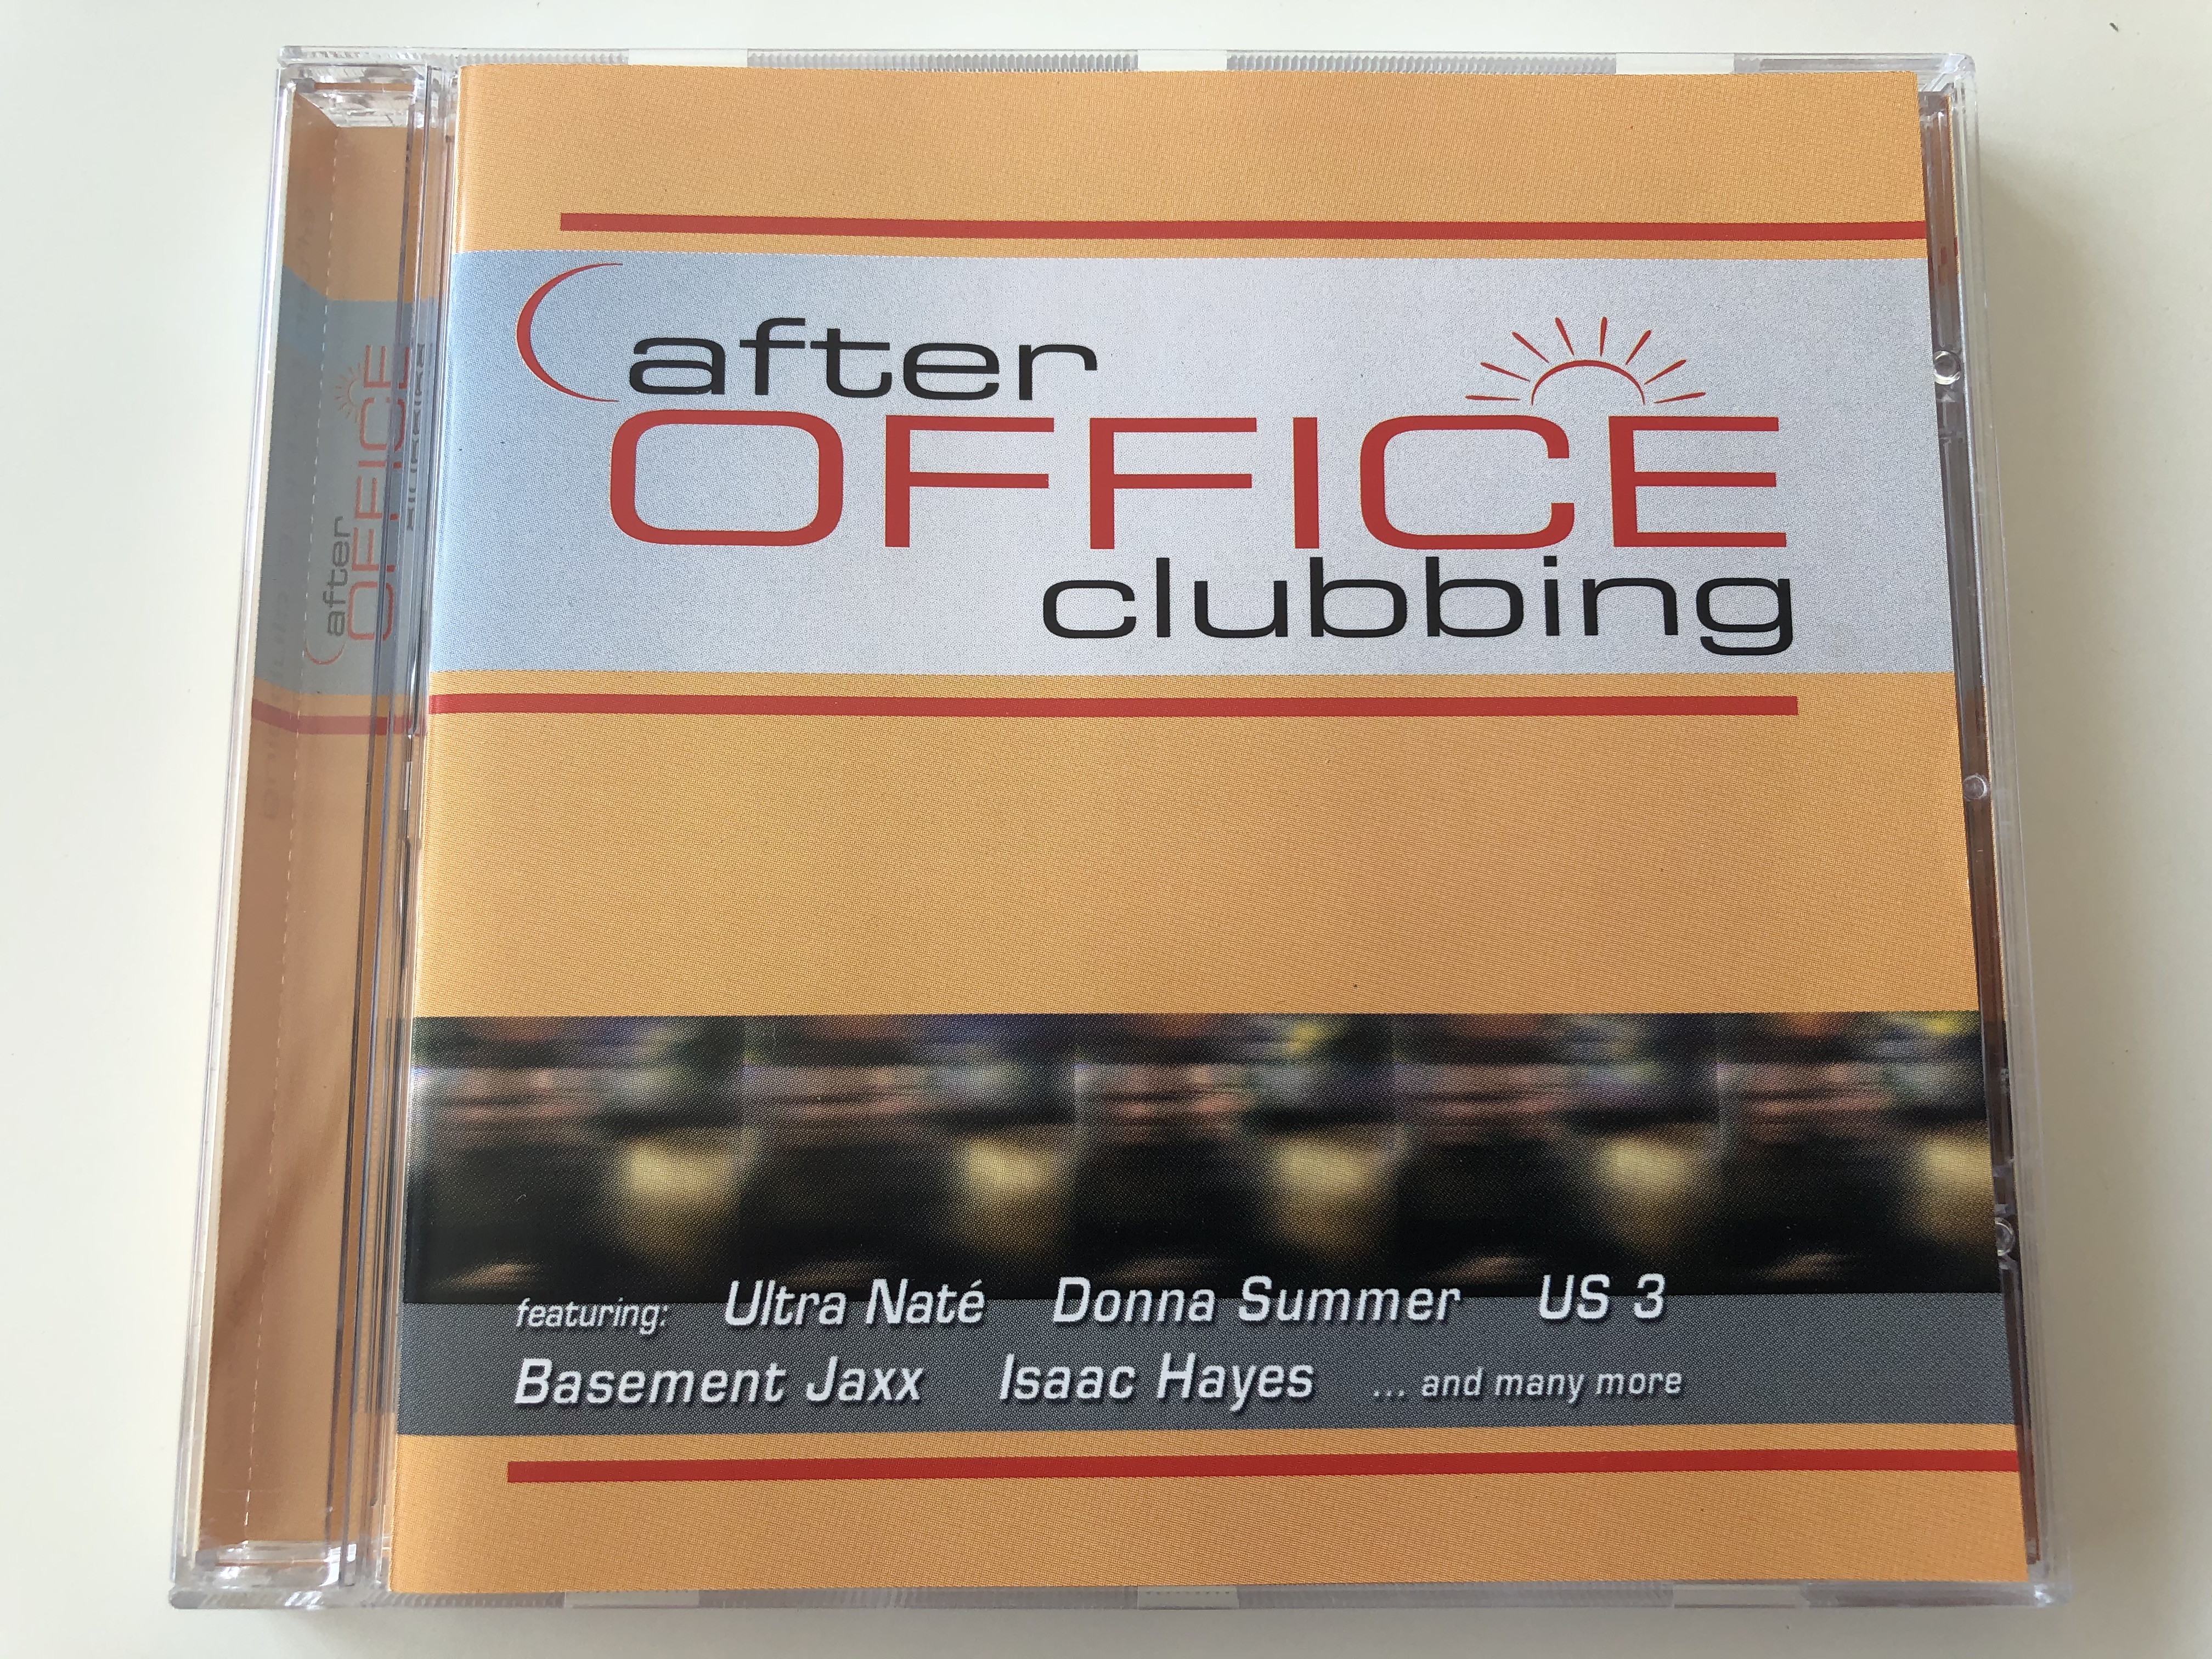 after-office-clubbing-featuring-ultra-nate-donna-summer-us-3-basement-jaxx-isaac-hayes...-and-many-more-zyx-music-audio-cd-2000-zyx-55199-2-1-.jpg